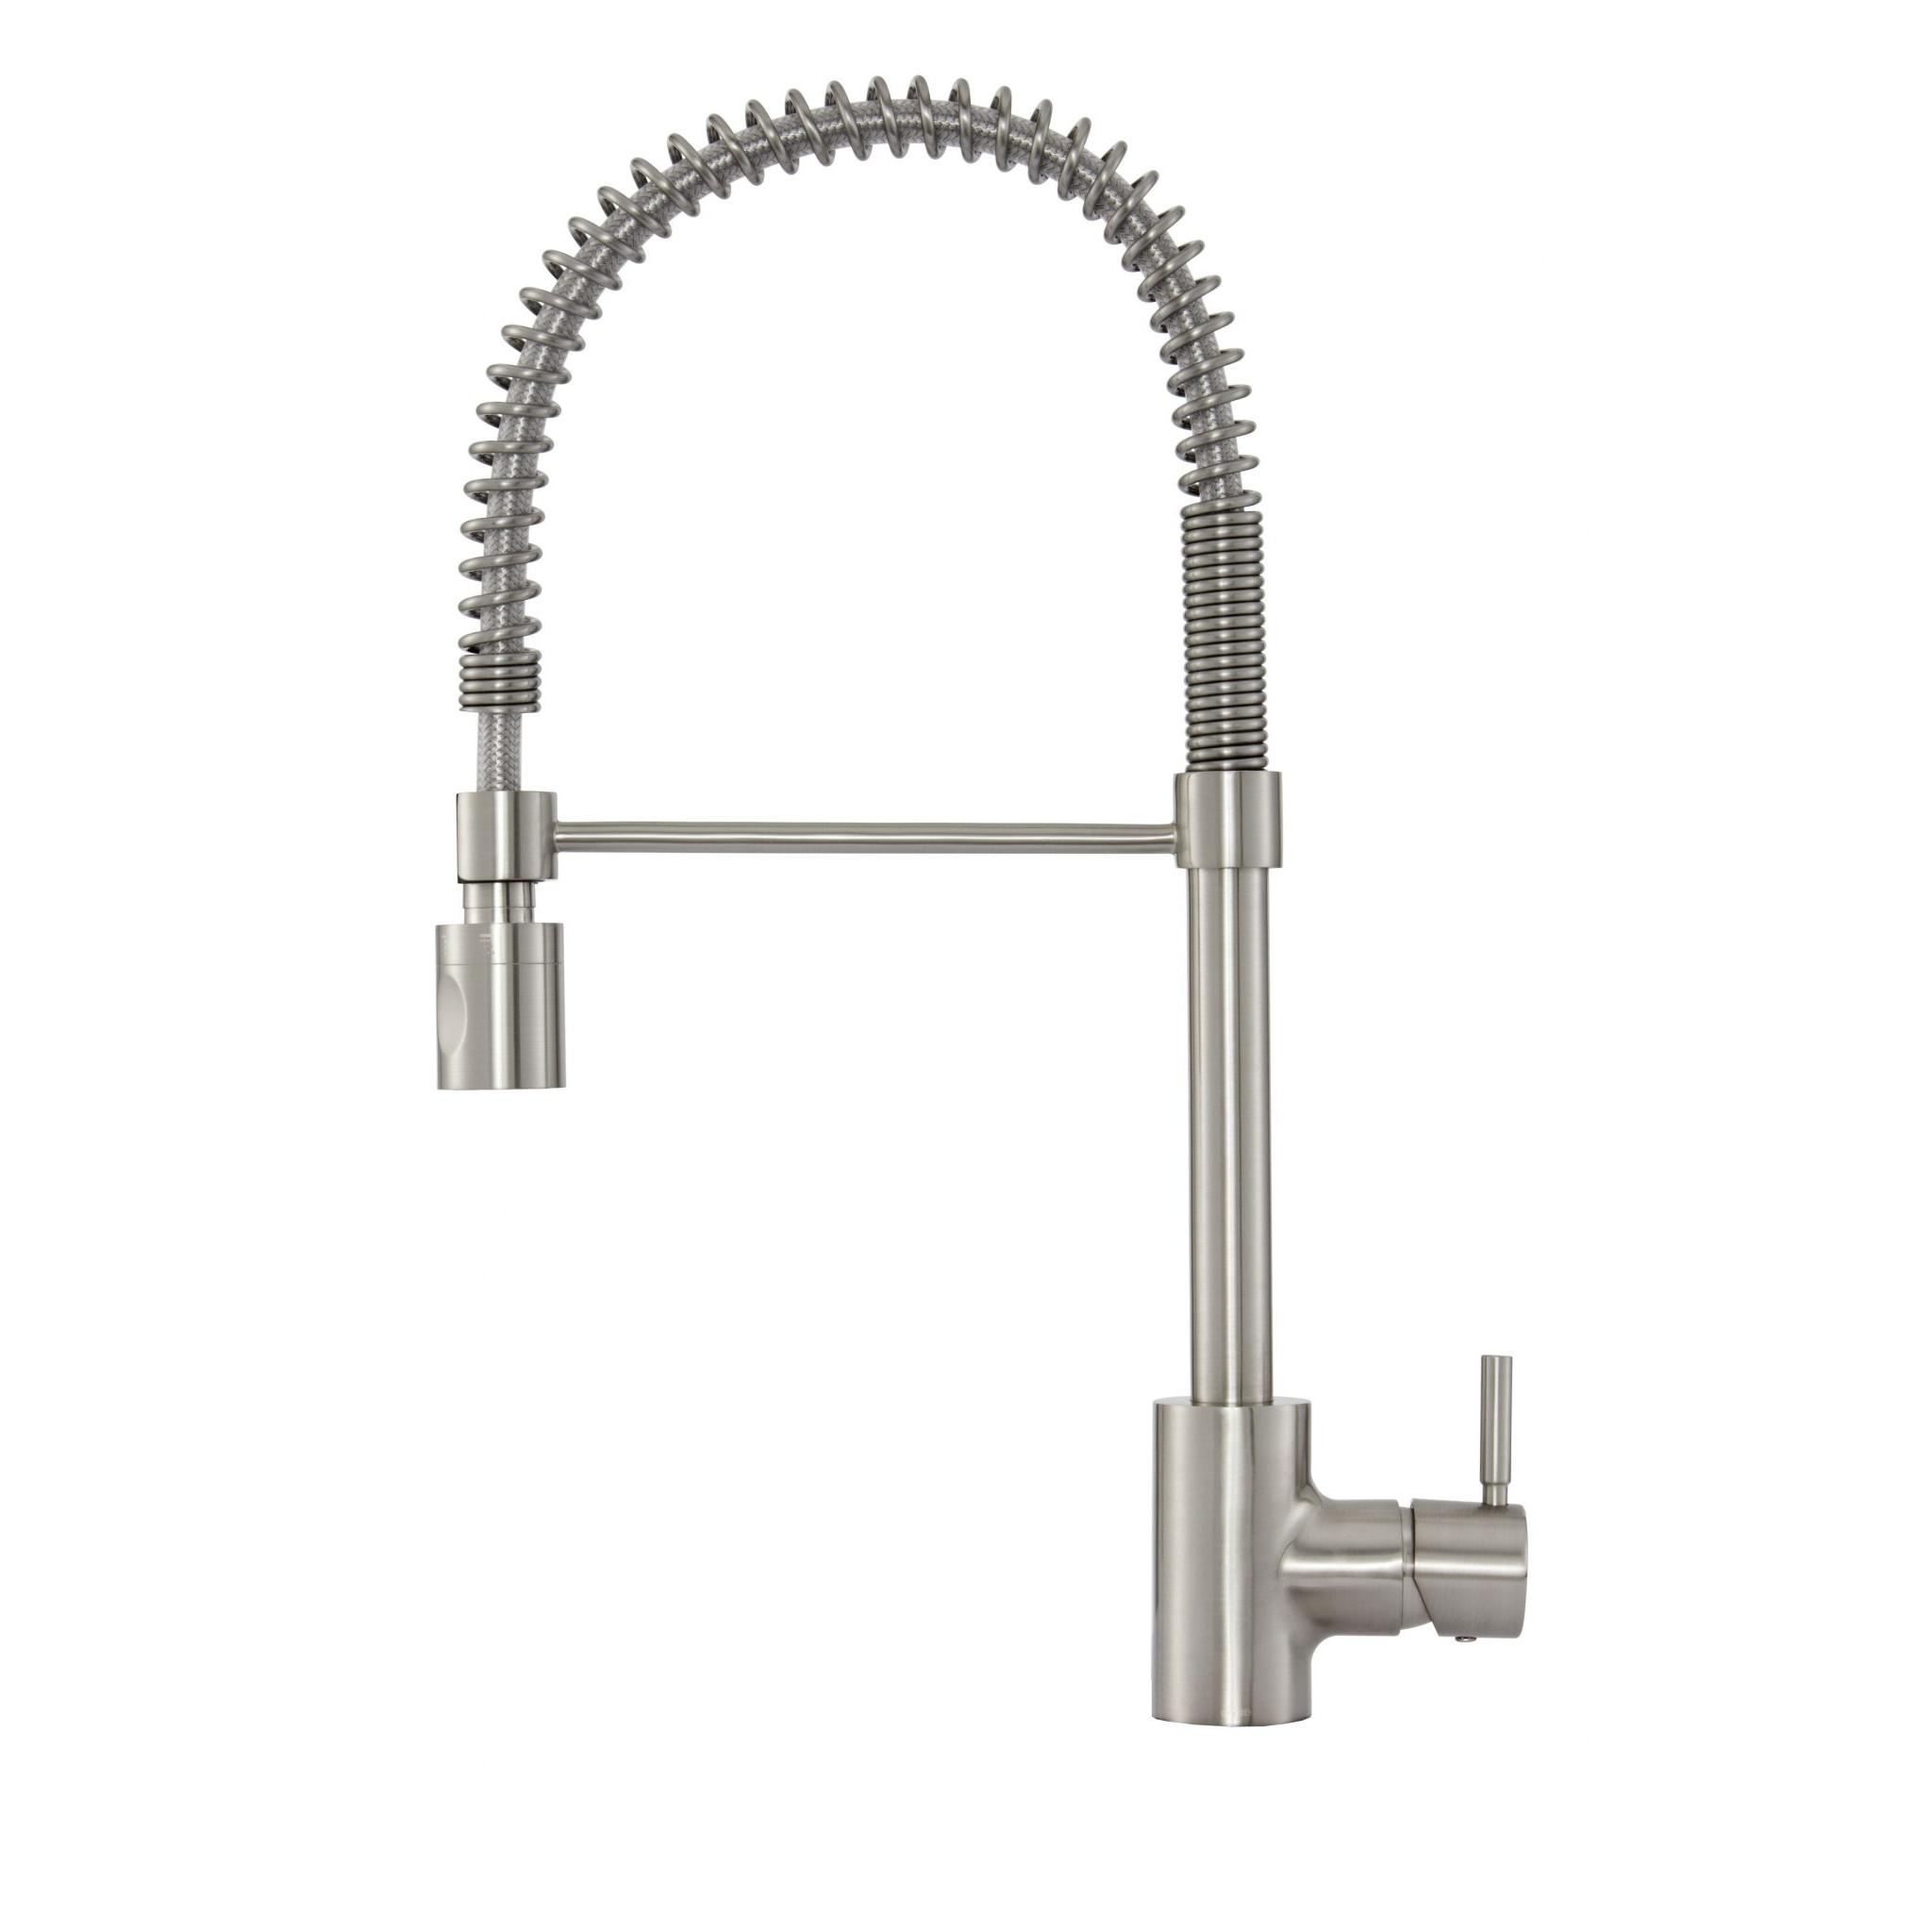 Danze DH451188SS The Foodie Pre-Rinse 1H Pull-Down Kitchen Faucet 1.75gpm - Stainless Steel